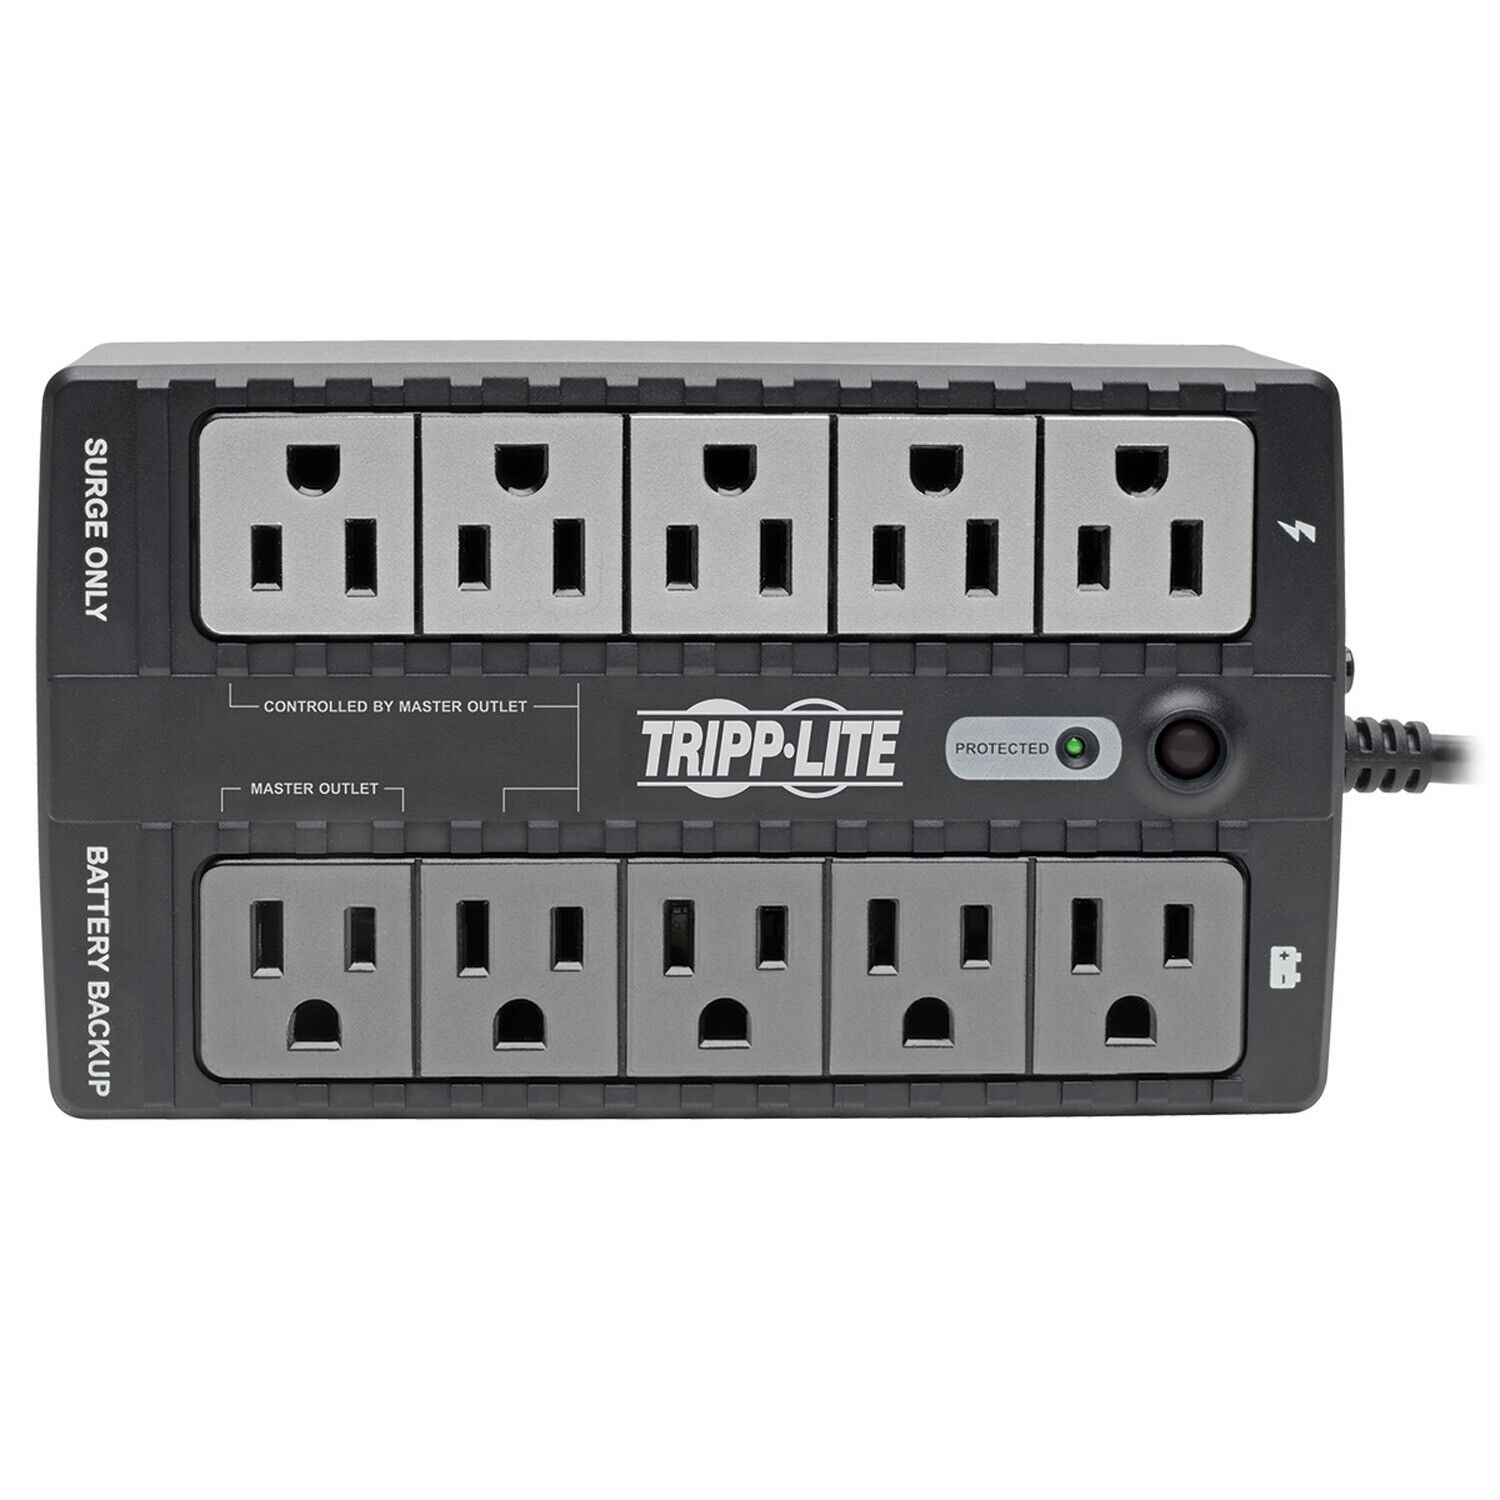 Tripp Lite by Eaton ECO Series Energy-Saving Standby UPS System (10 Outlet)